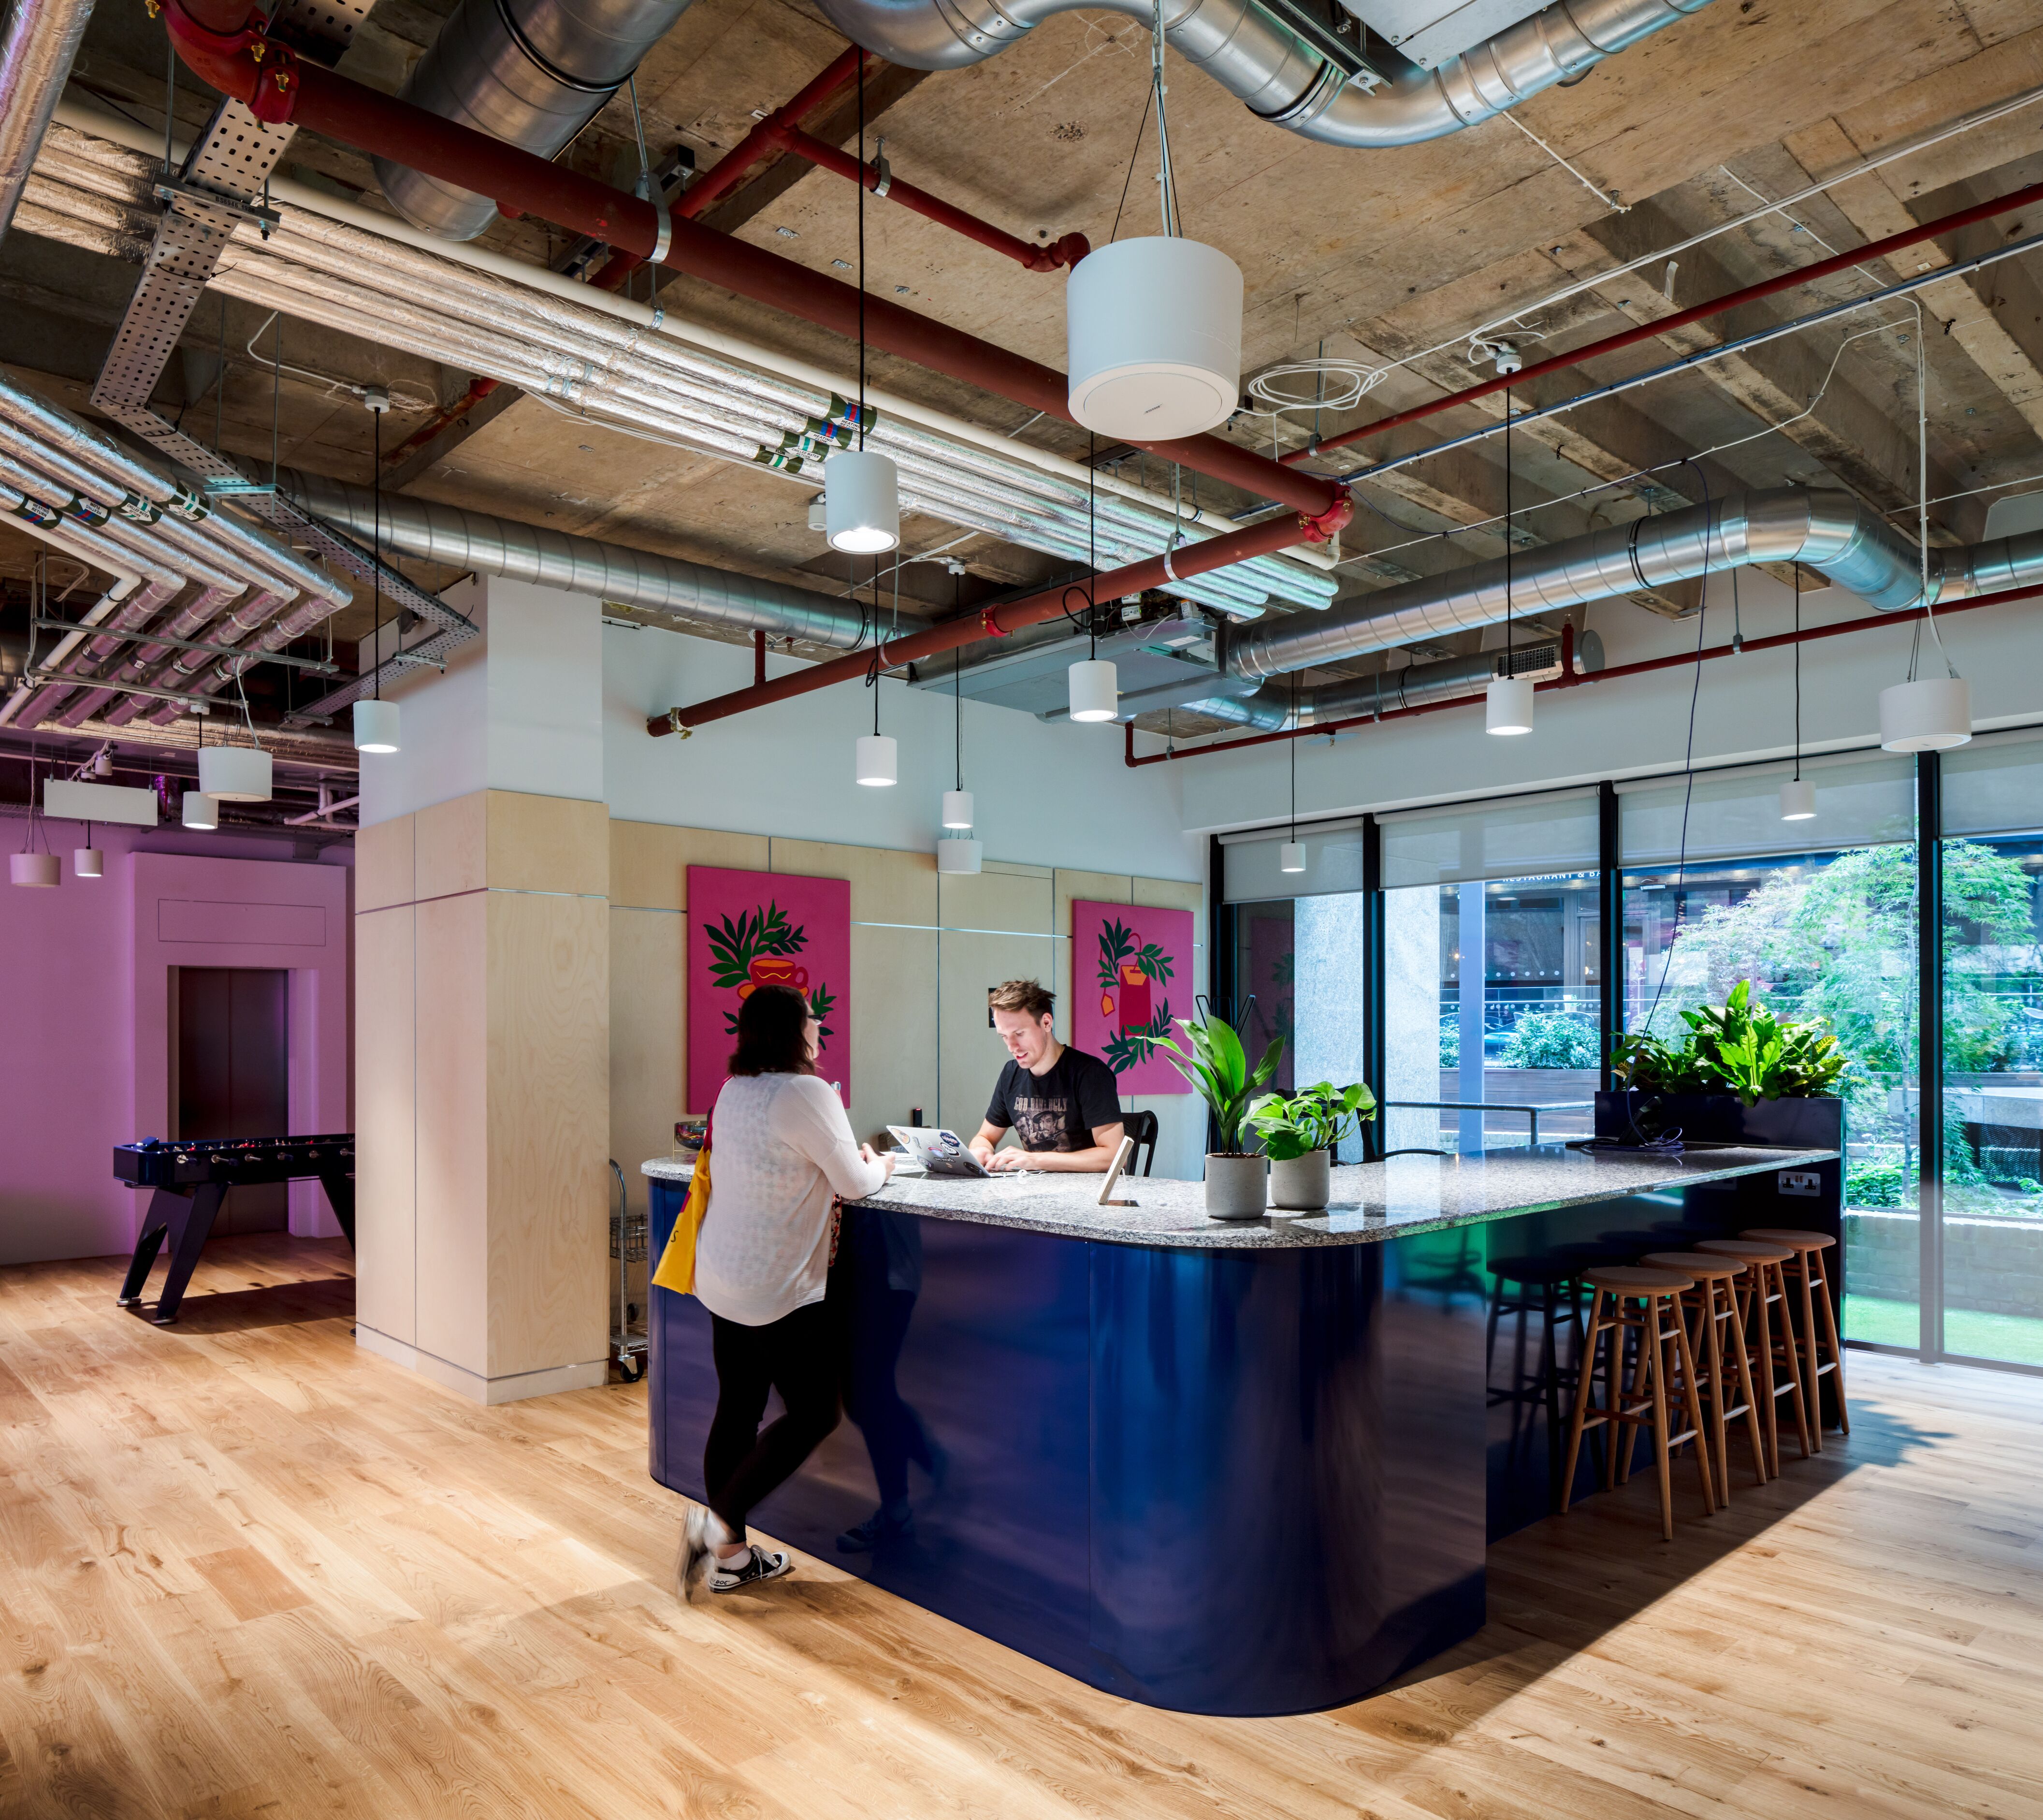 Images WeWork 8 Devonshire Square - Coworking & Office Space